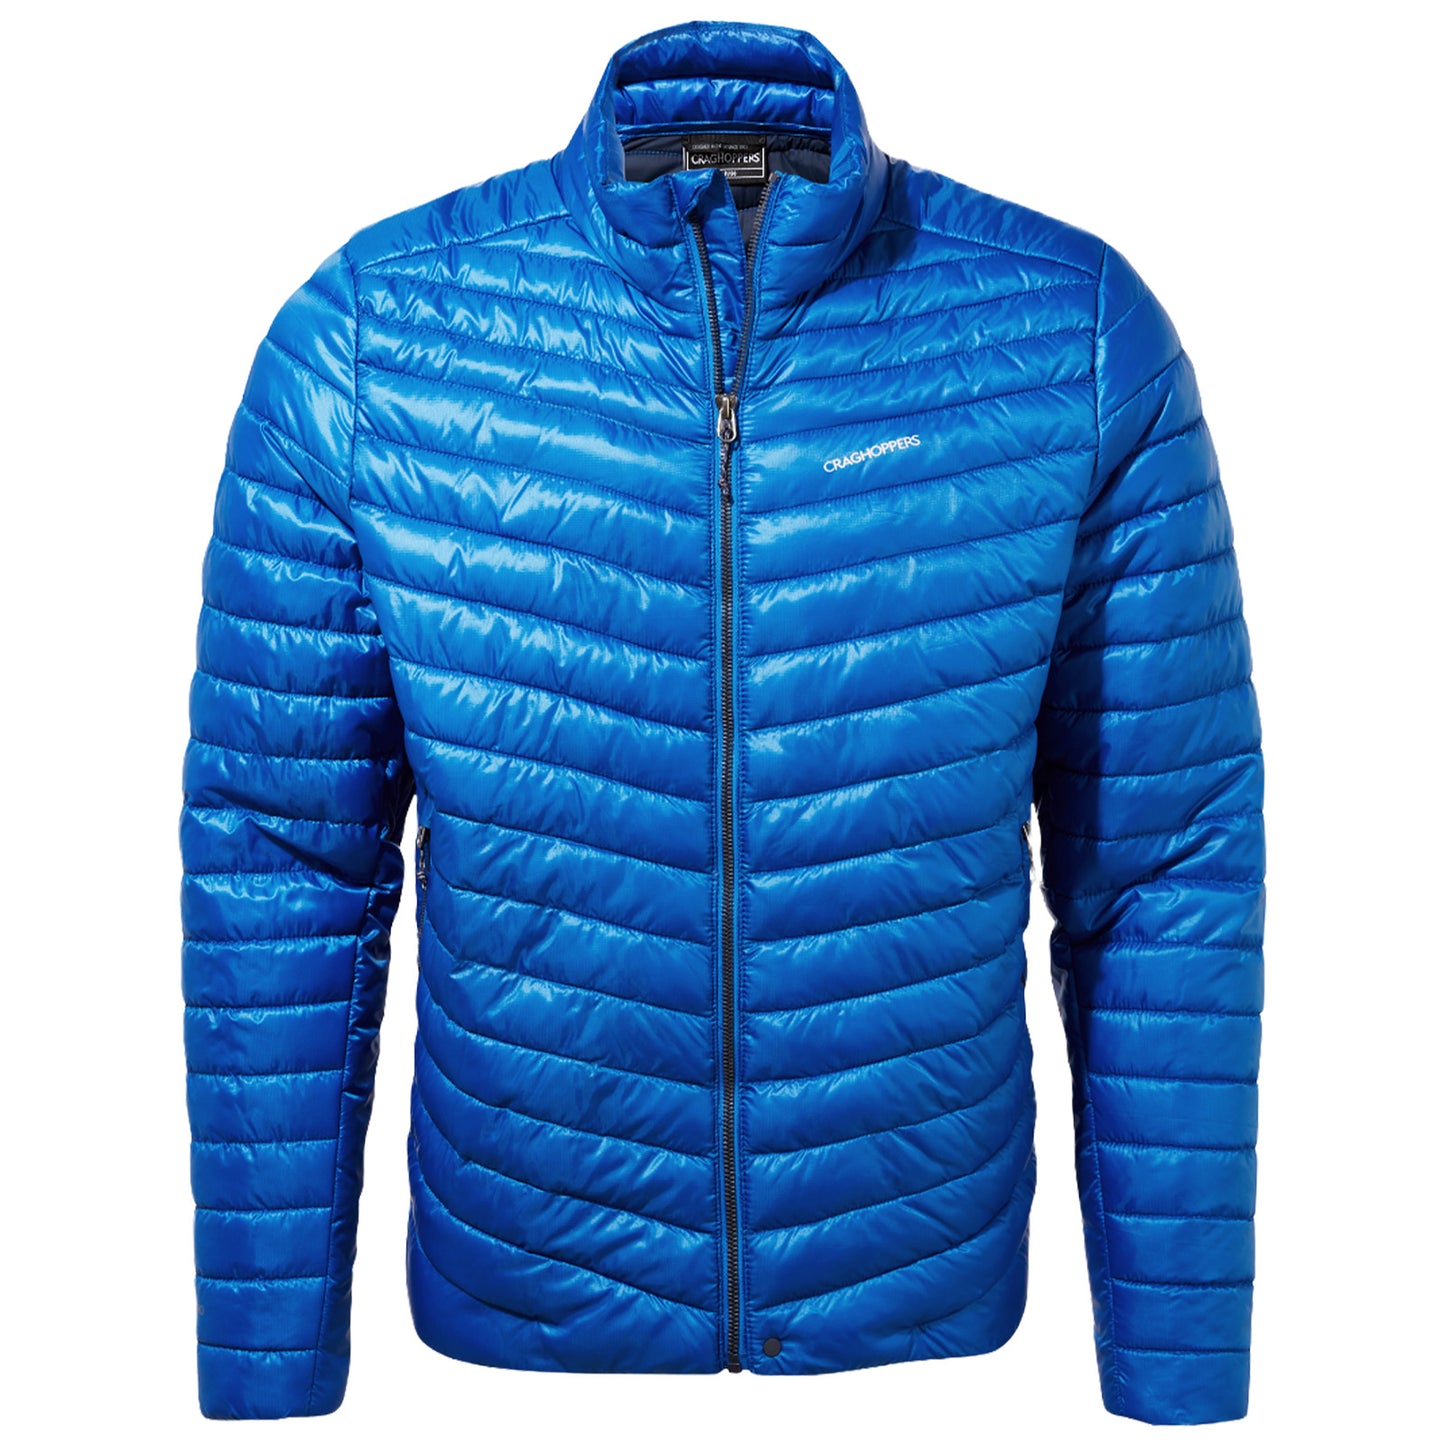 Craghoppers Mens Insulated ExpoLite Jacket